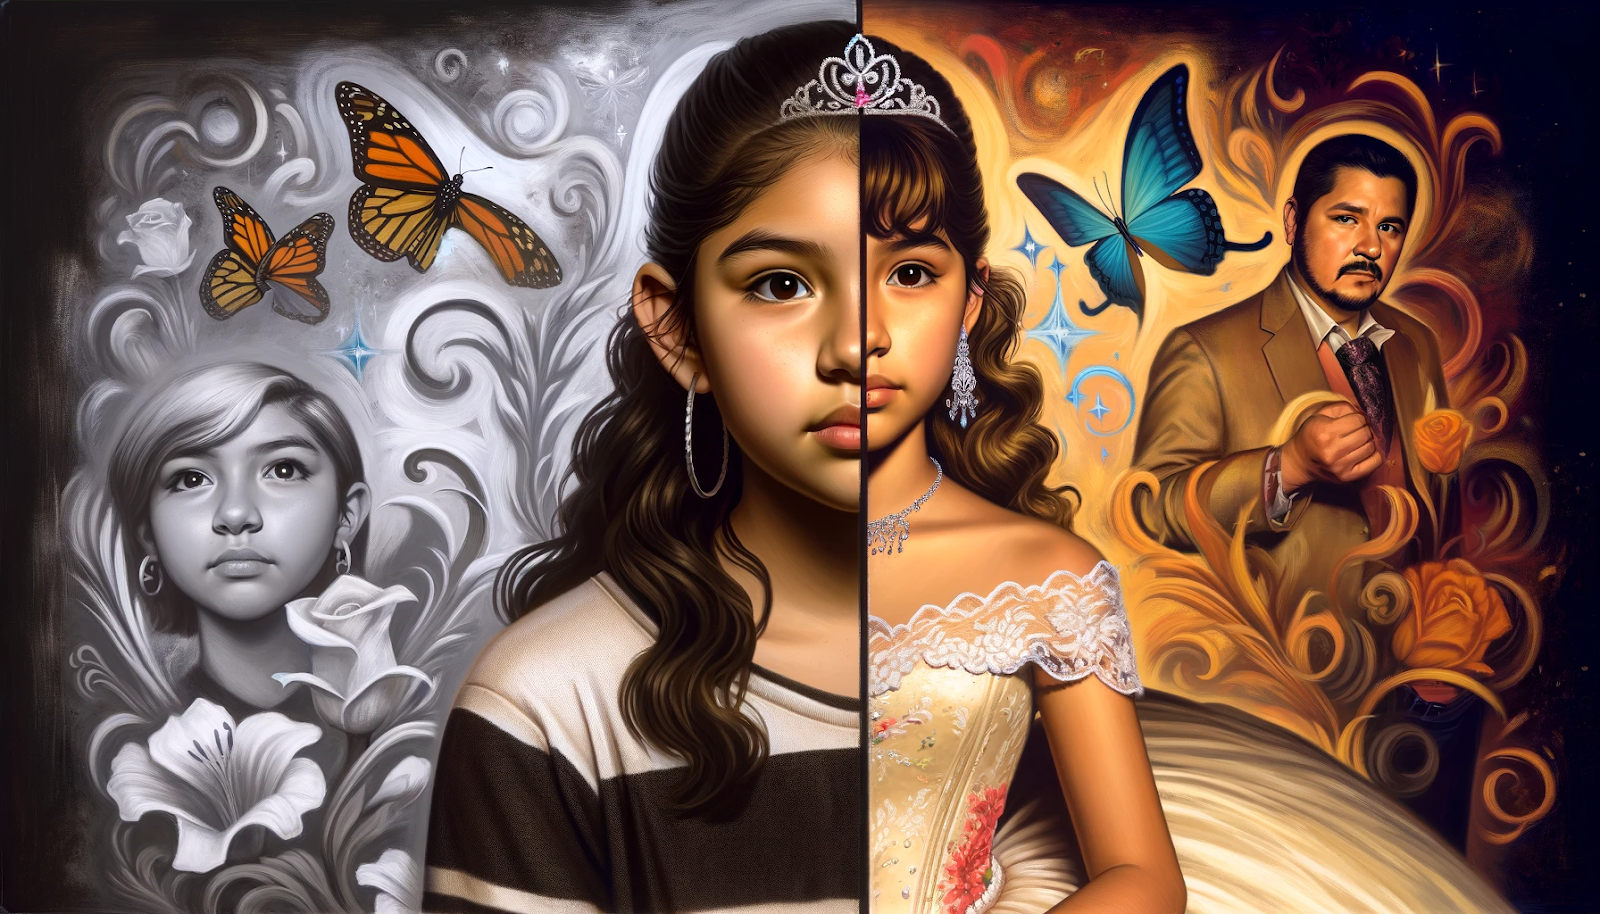 Quinceañera, an illustration of a young girl and a man in a painting